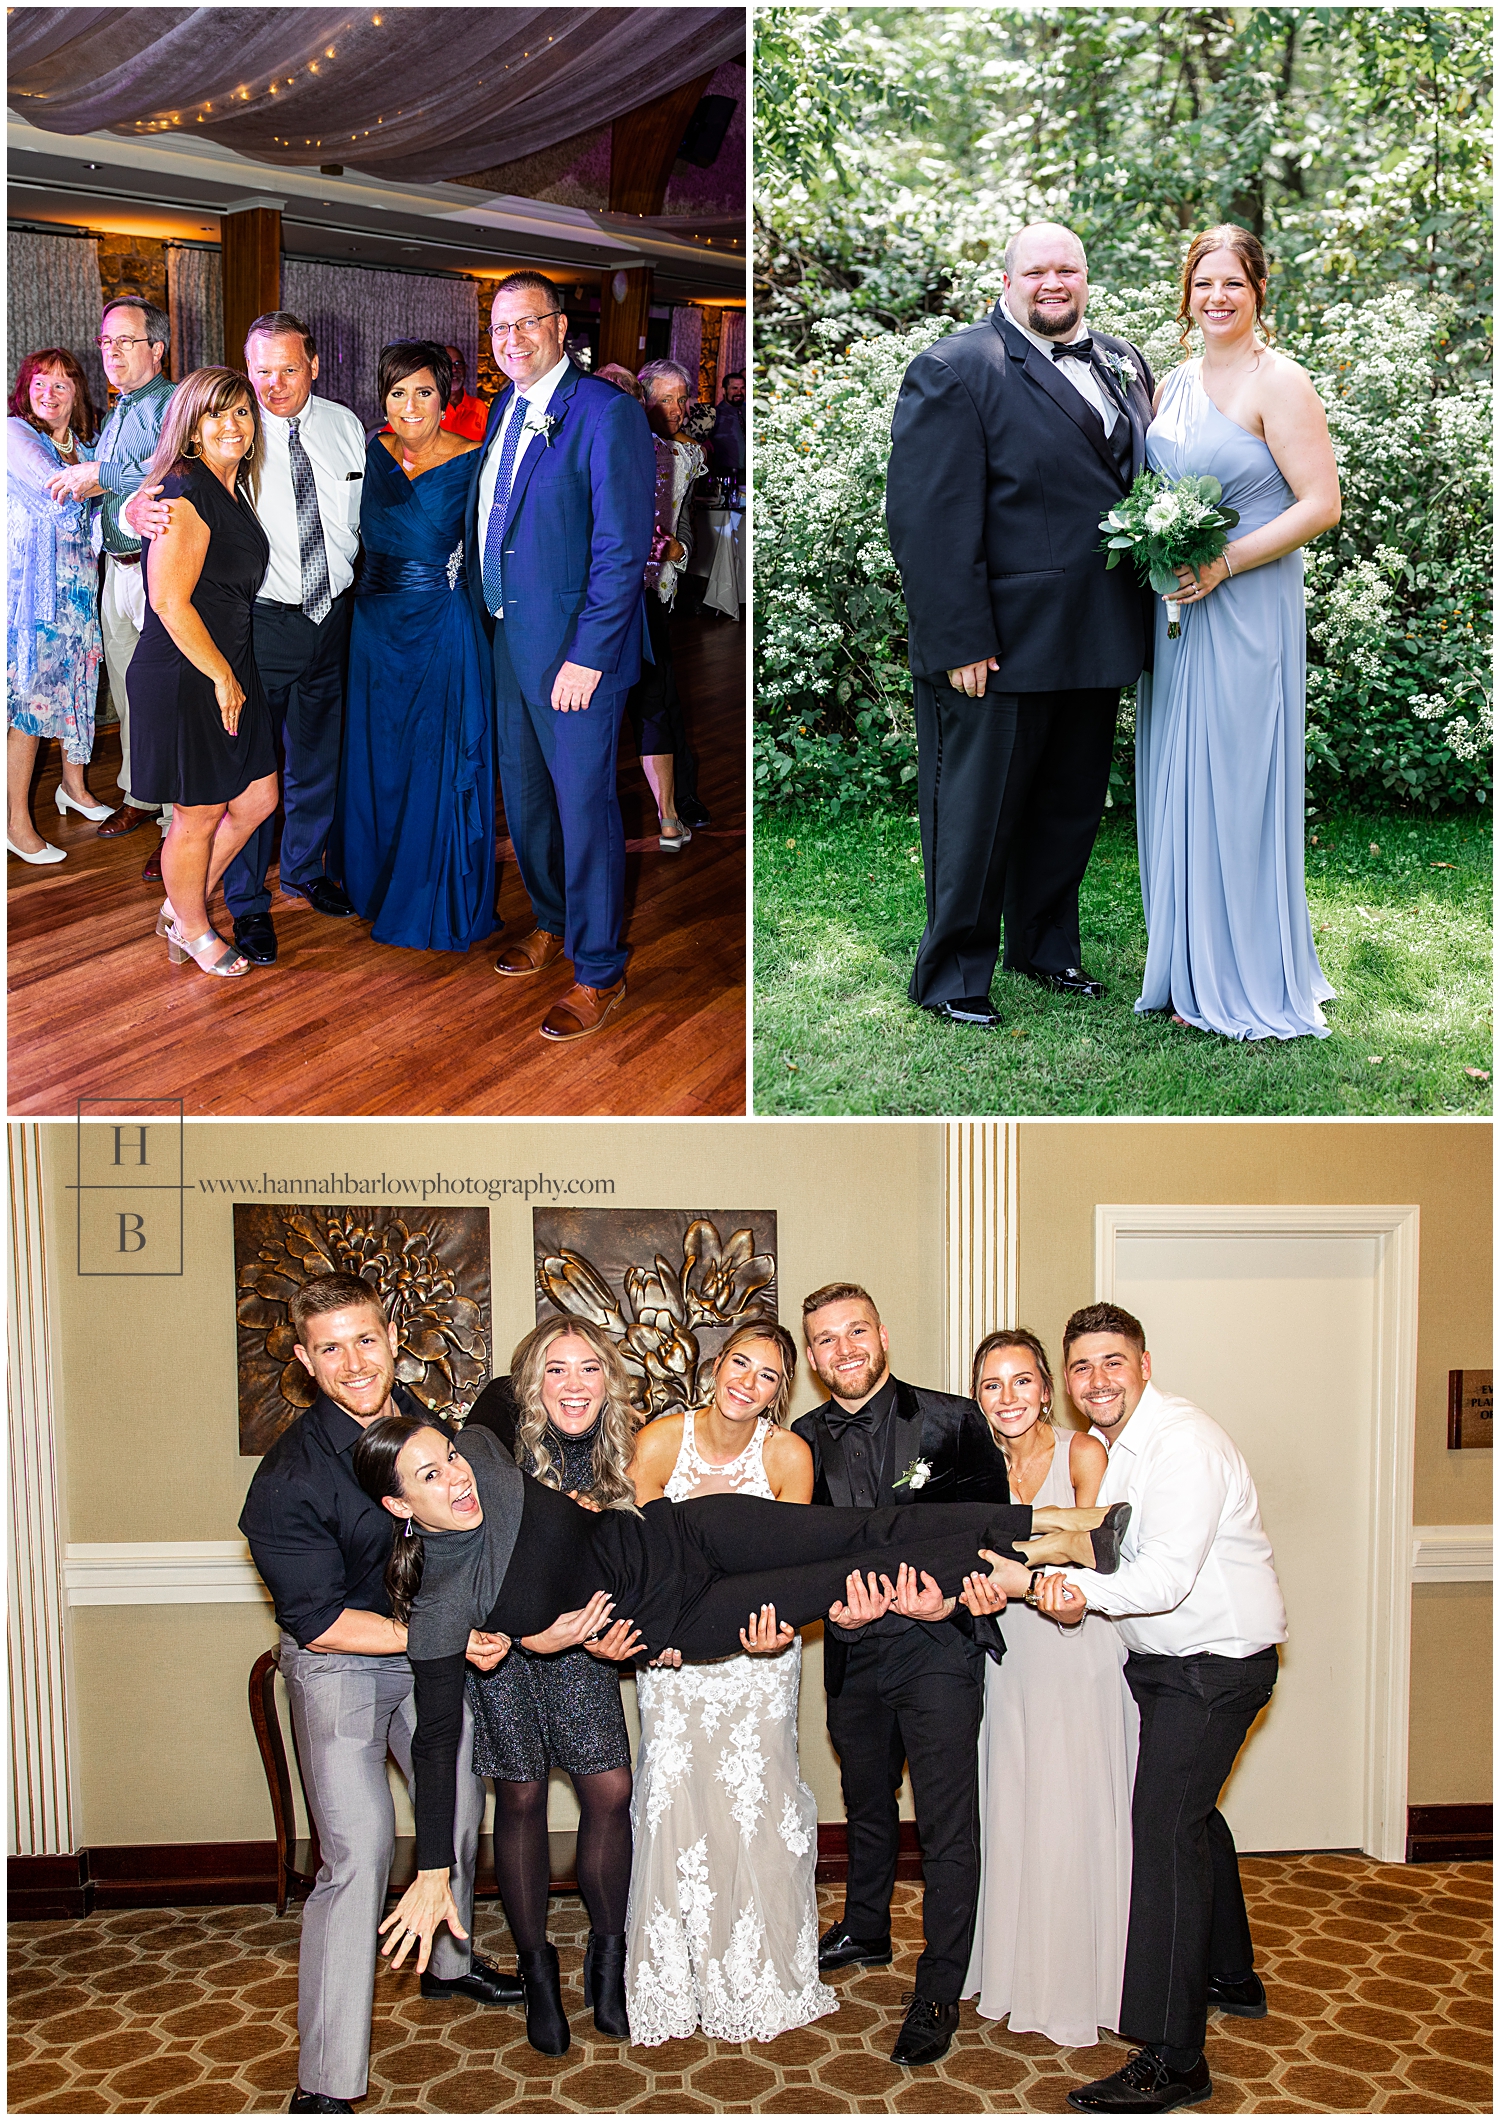 Collage of wedding guests and family members